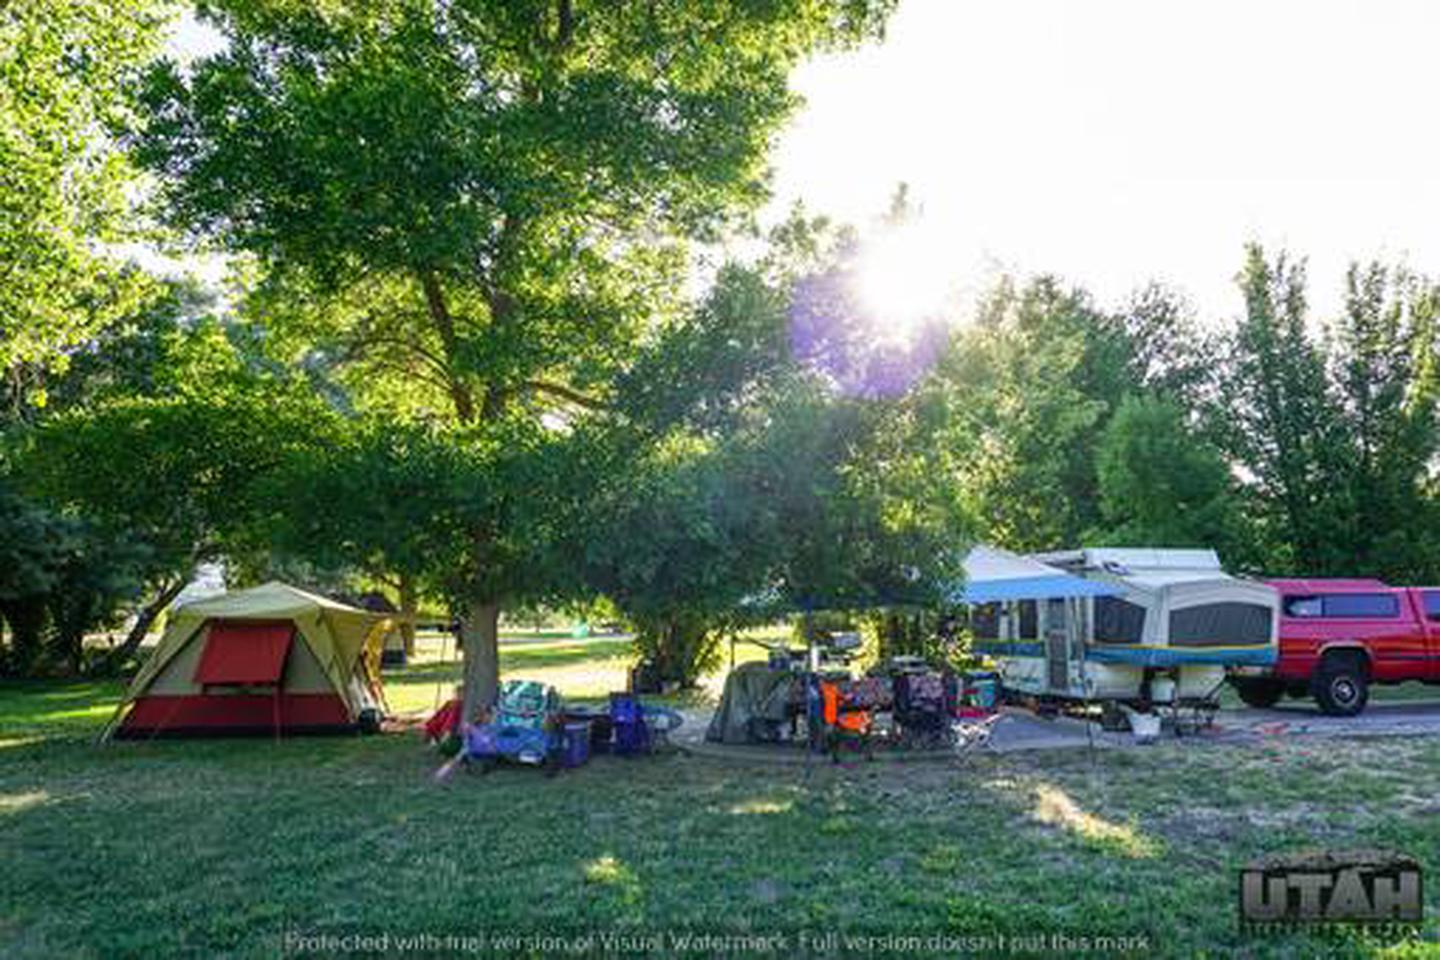 Anderson Cove Campground A-011